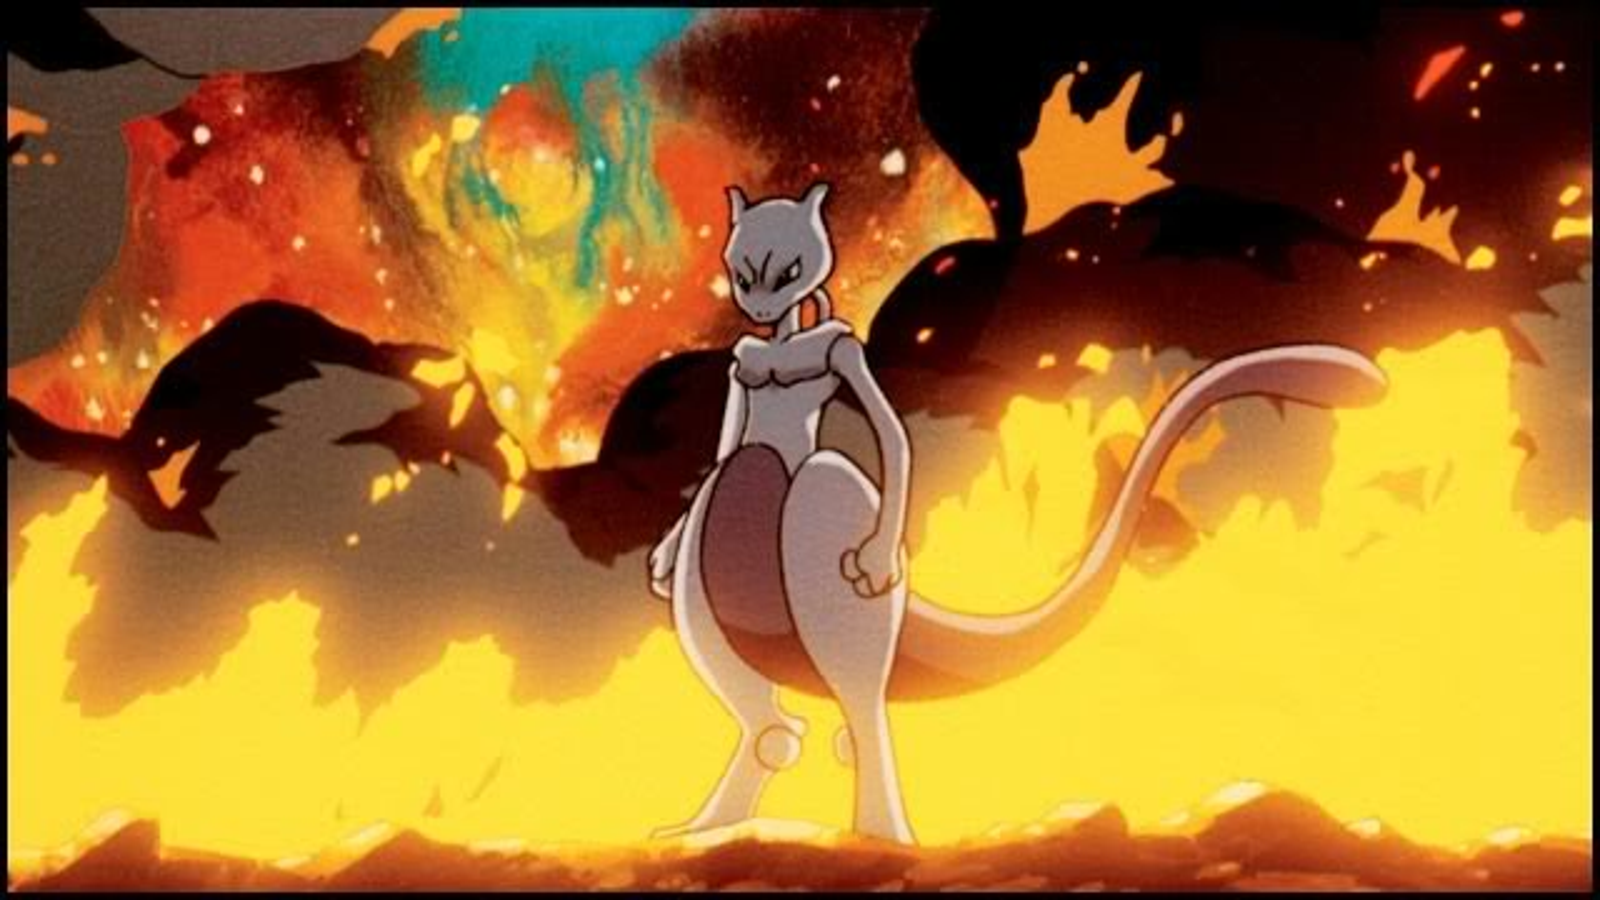 Mega Mewtwo X and Y Become Available in Pokémon Sun and Moon